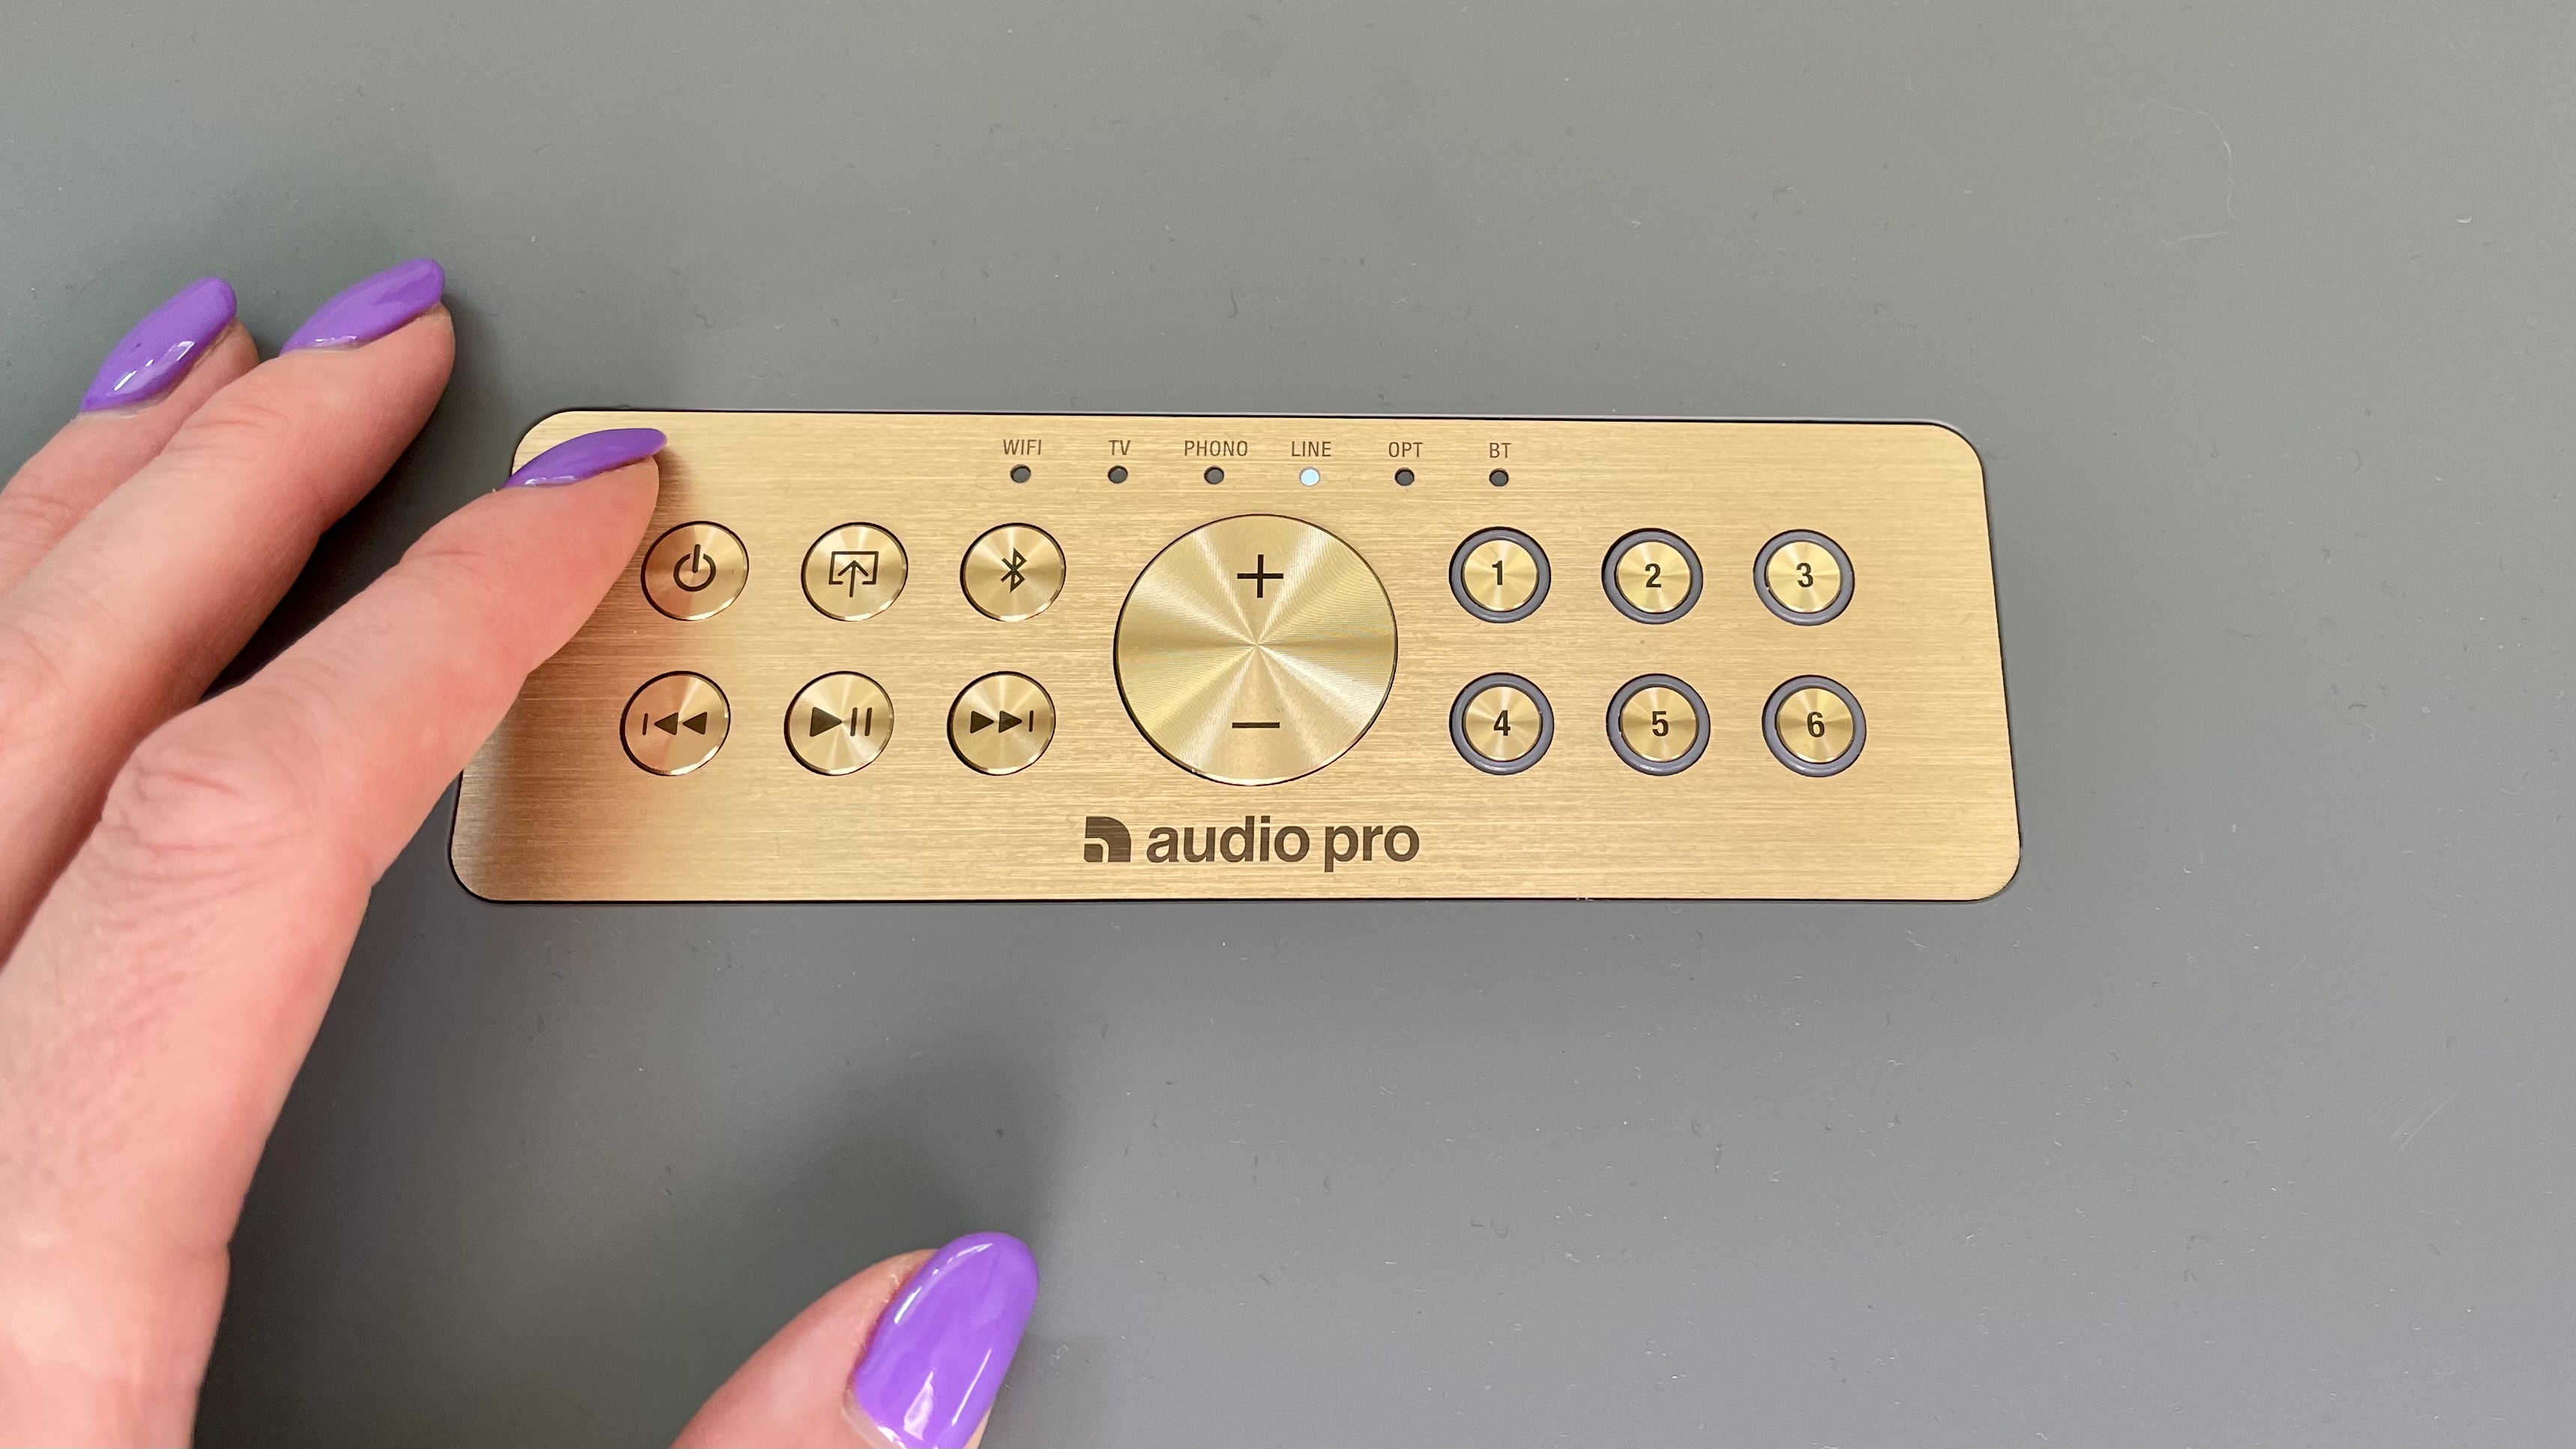 Audio Pro C20 top-plate closeup, with a hand pressing one of the buttons